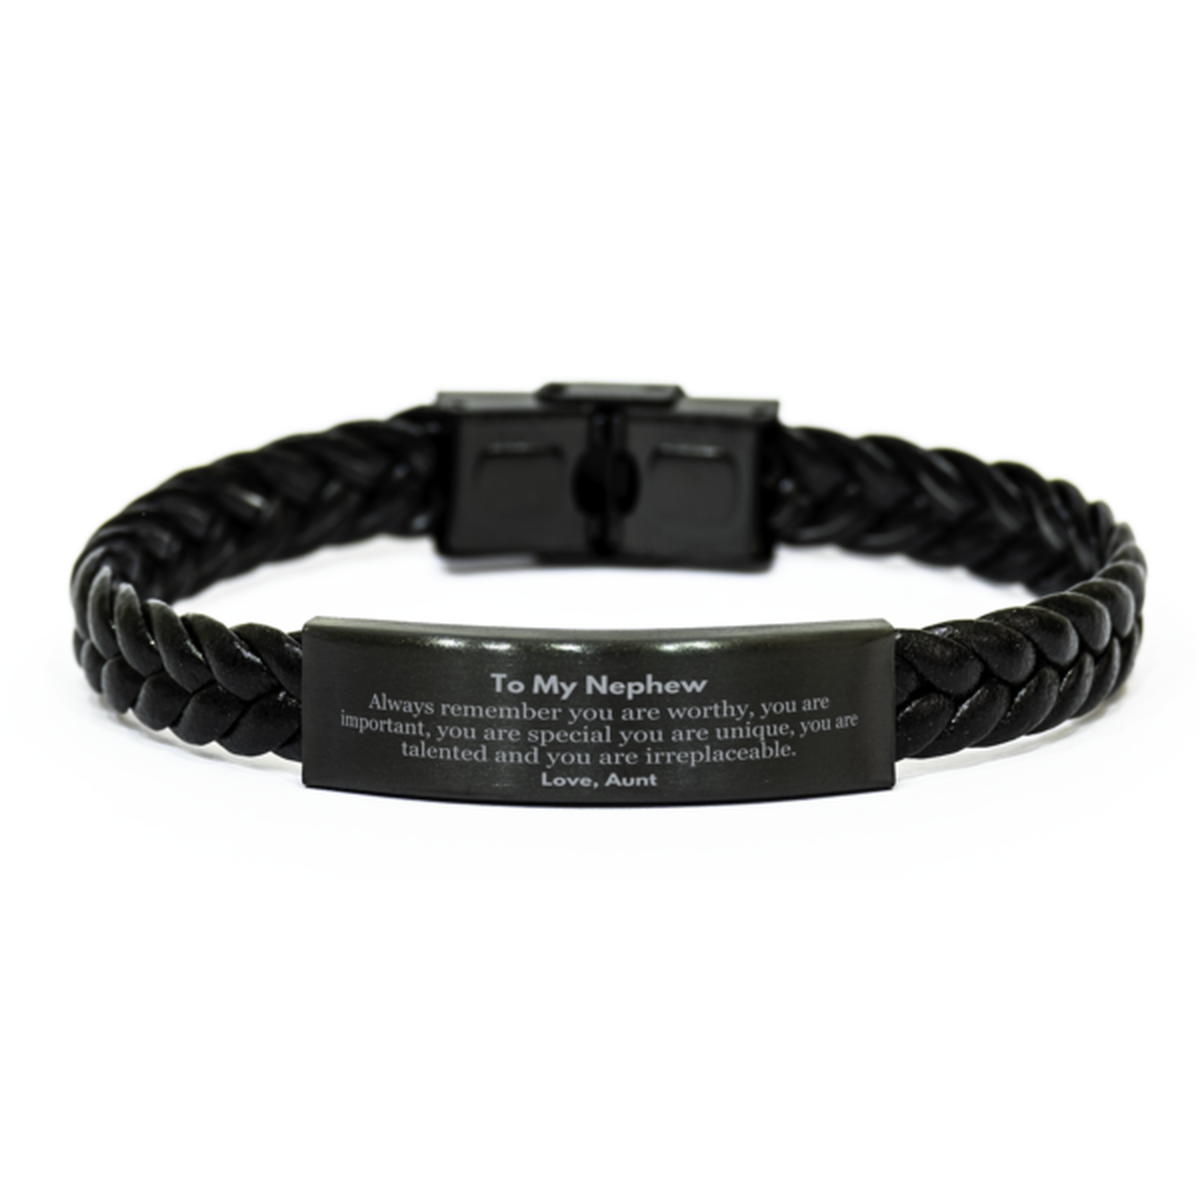 Nephew Birthday Gifts from Aunt, Inspirational Braided Leather Bracelet for Nephew Christmas Graduation Gifts for Nephew Always remember you are worthy, you are important. Love, Aunt